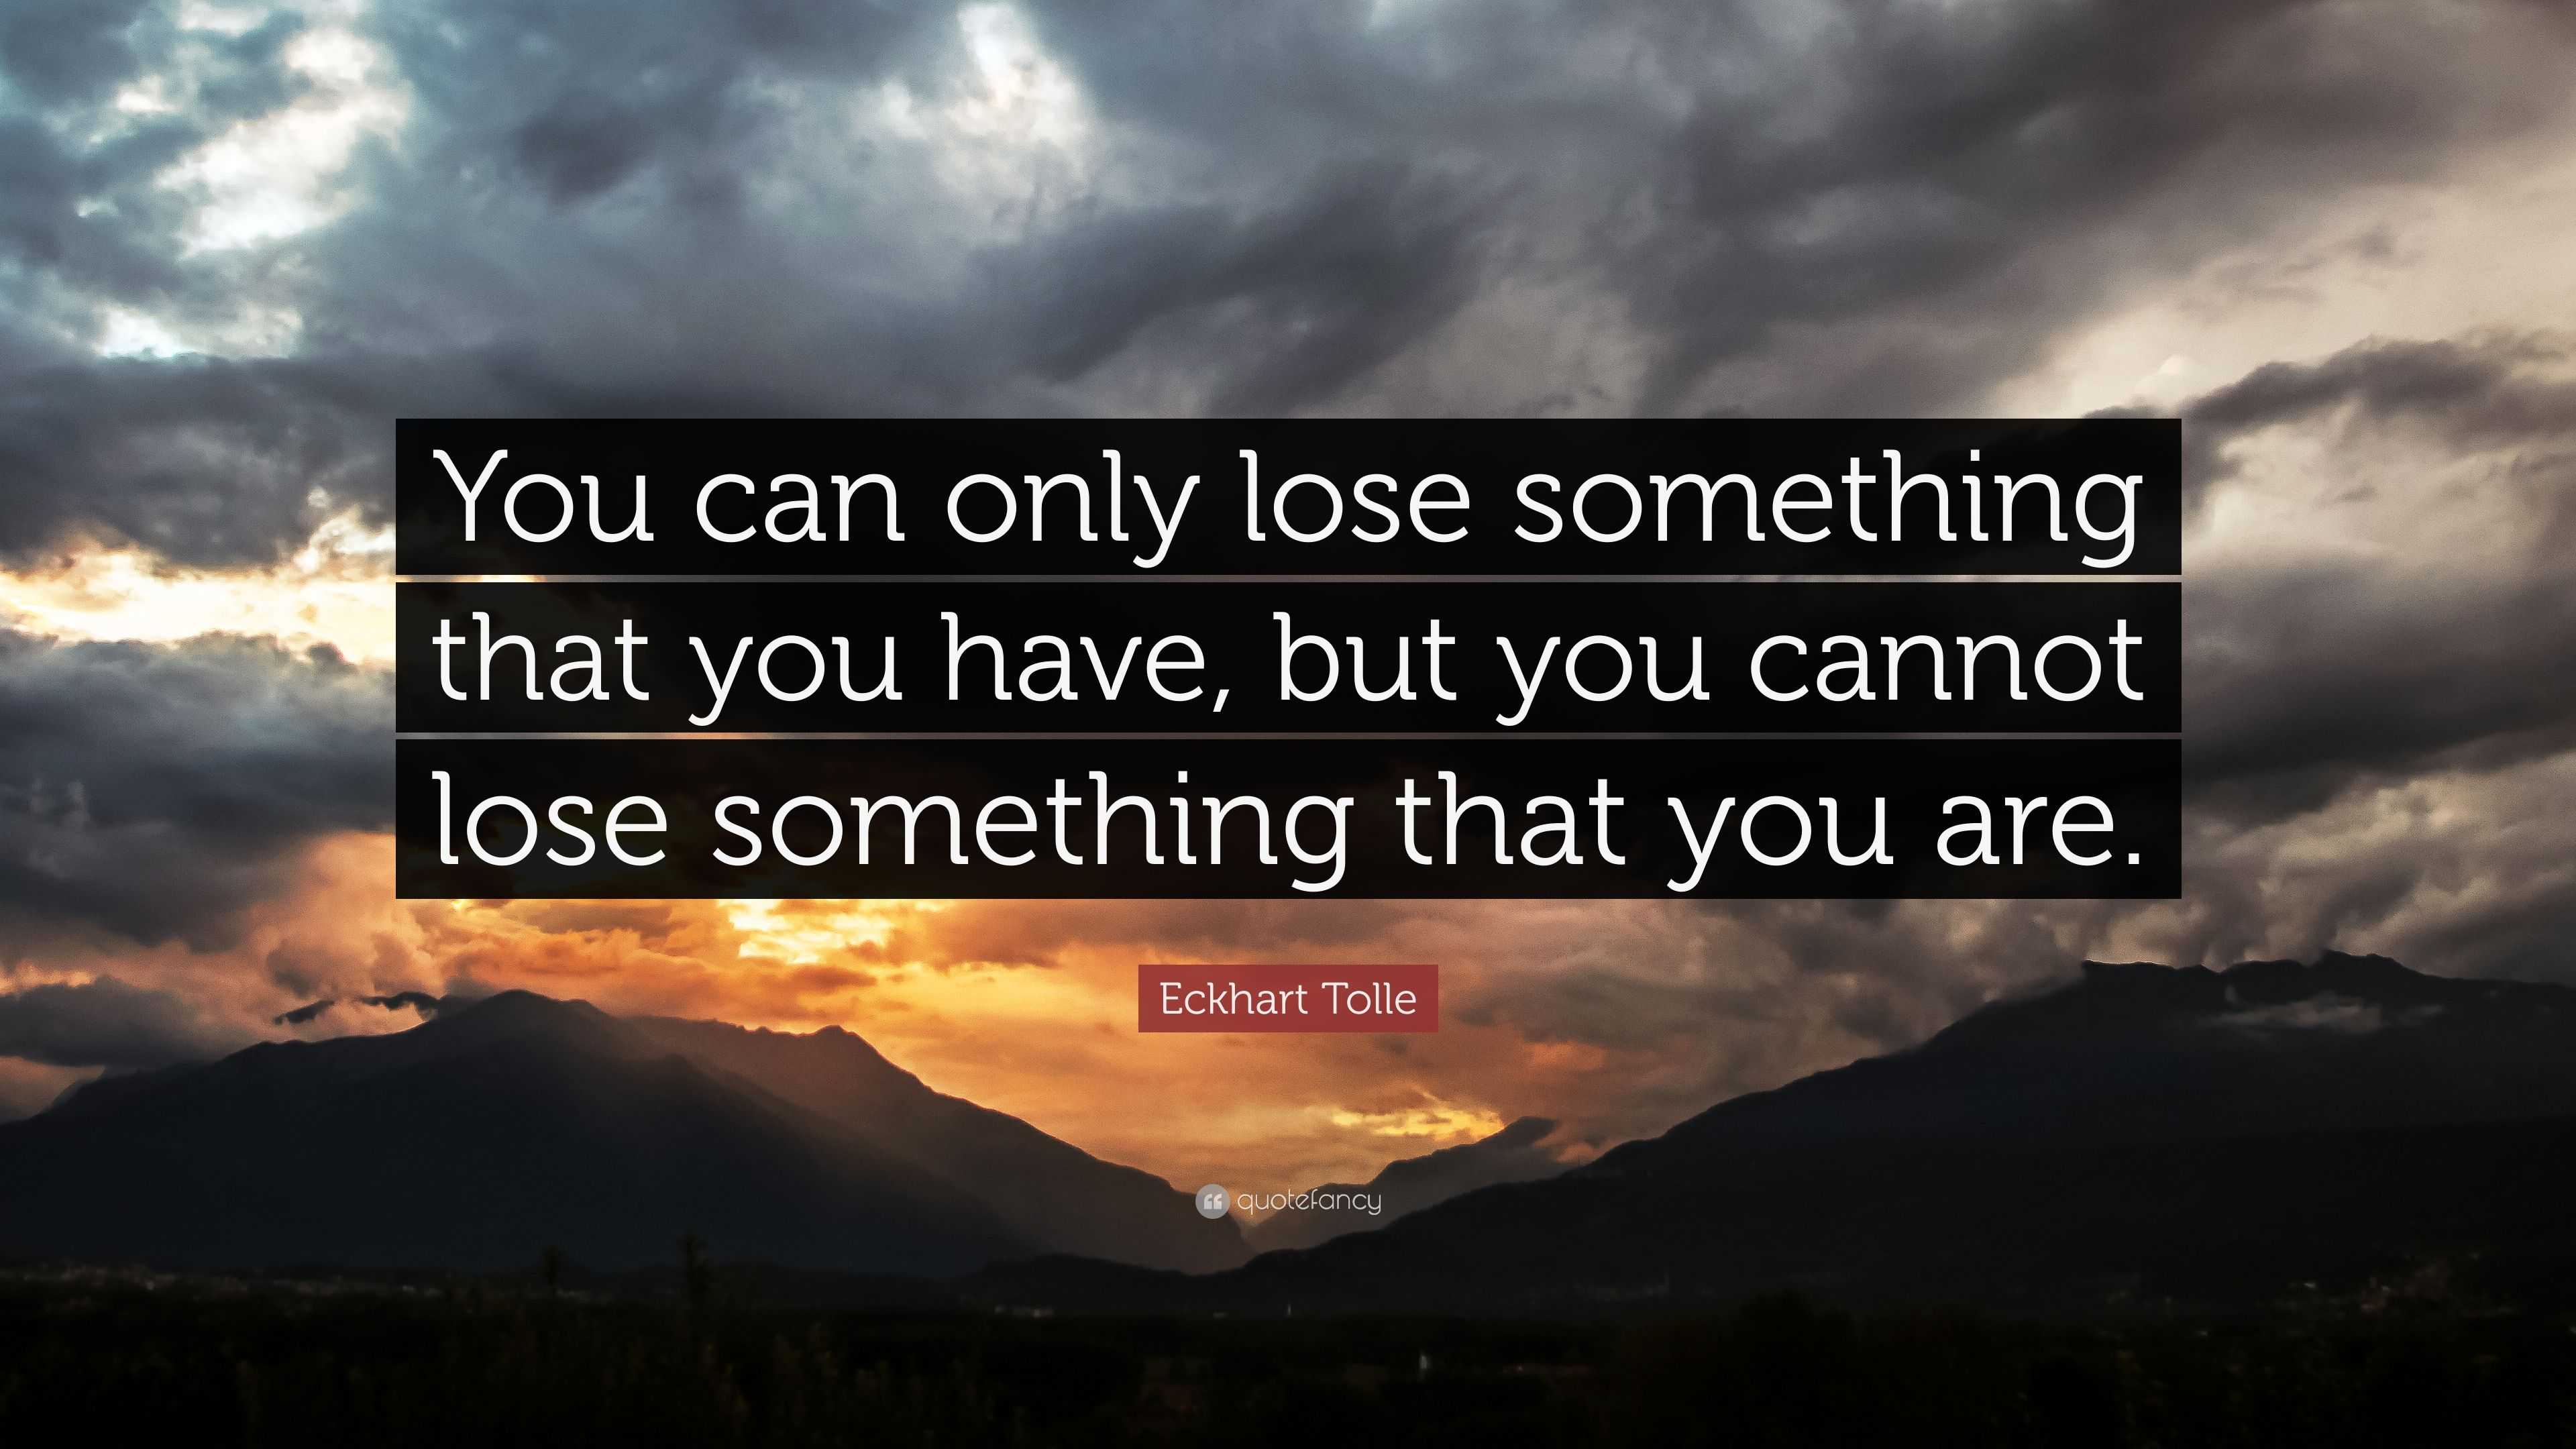 Eckhart Tolle Quote “you Can Only Lose Something That You Have But